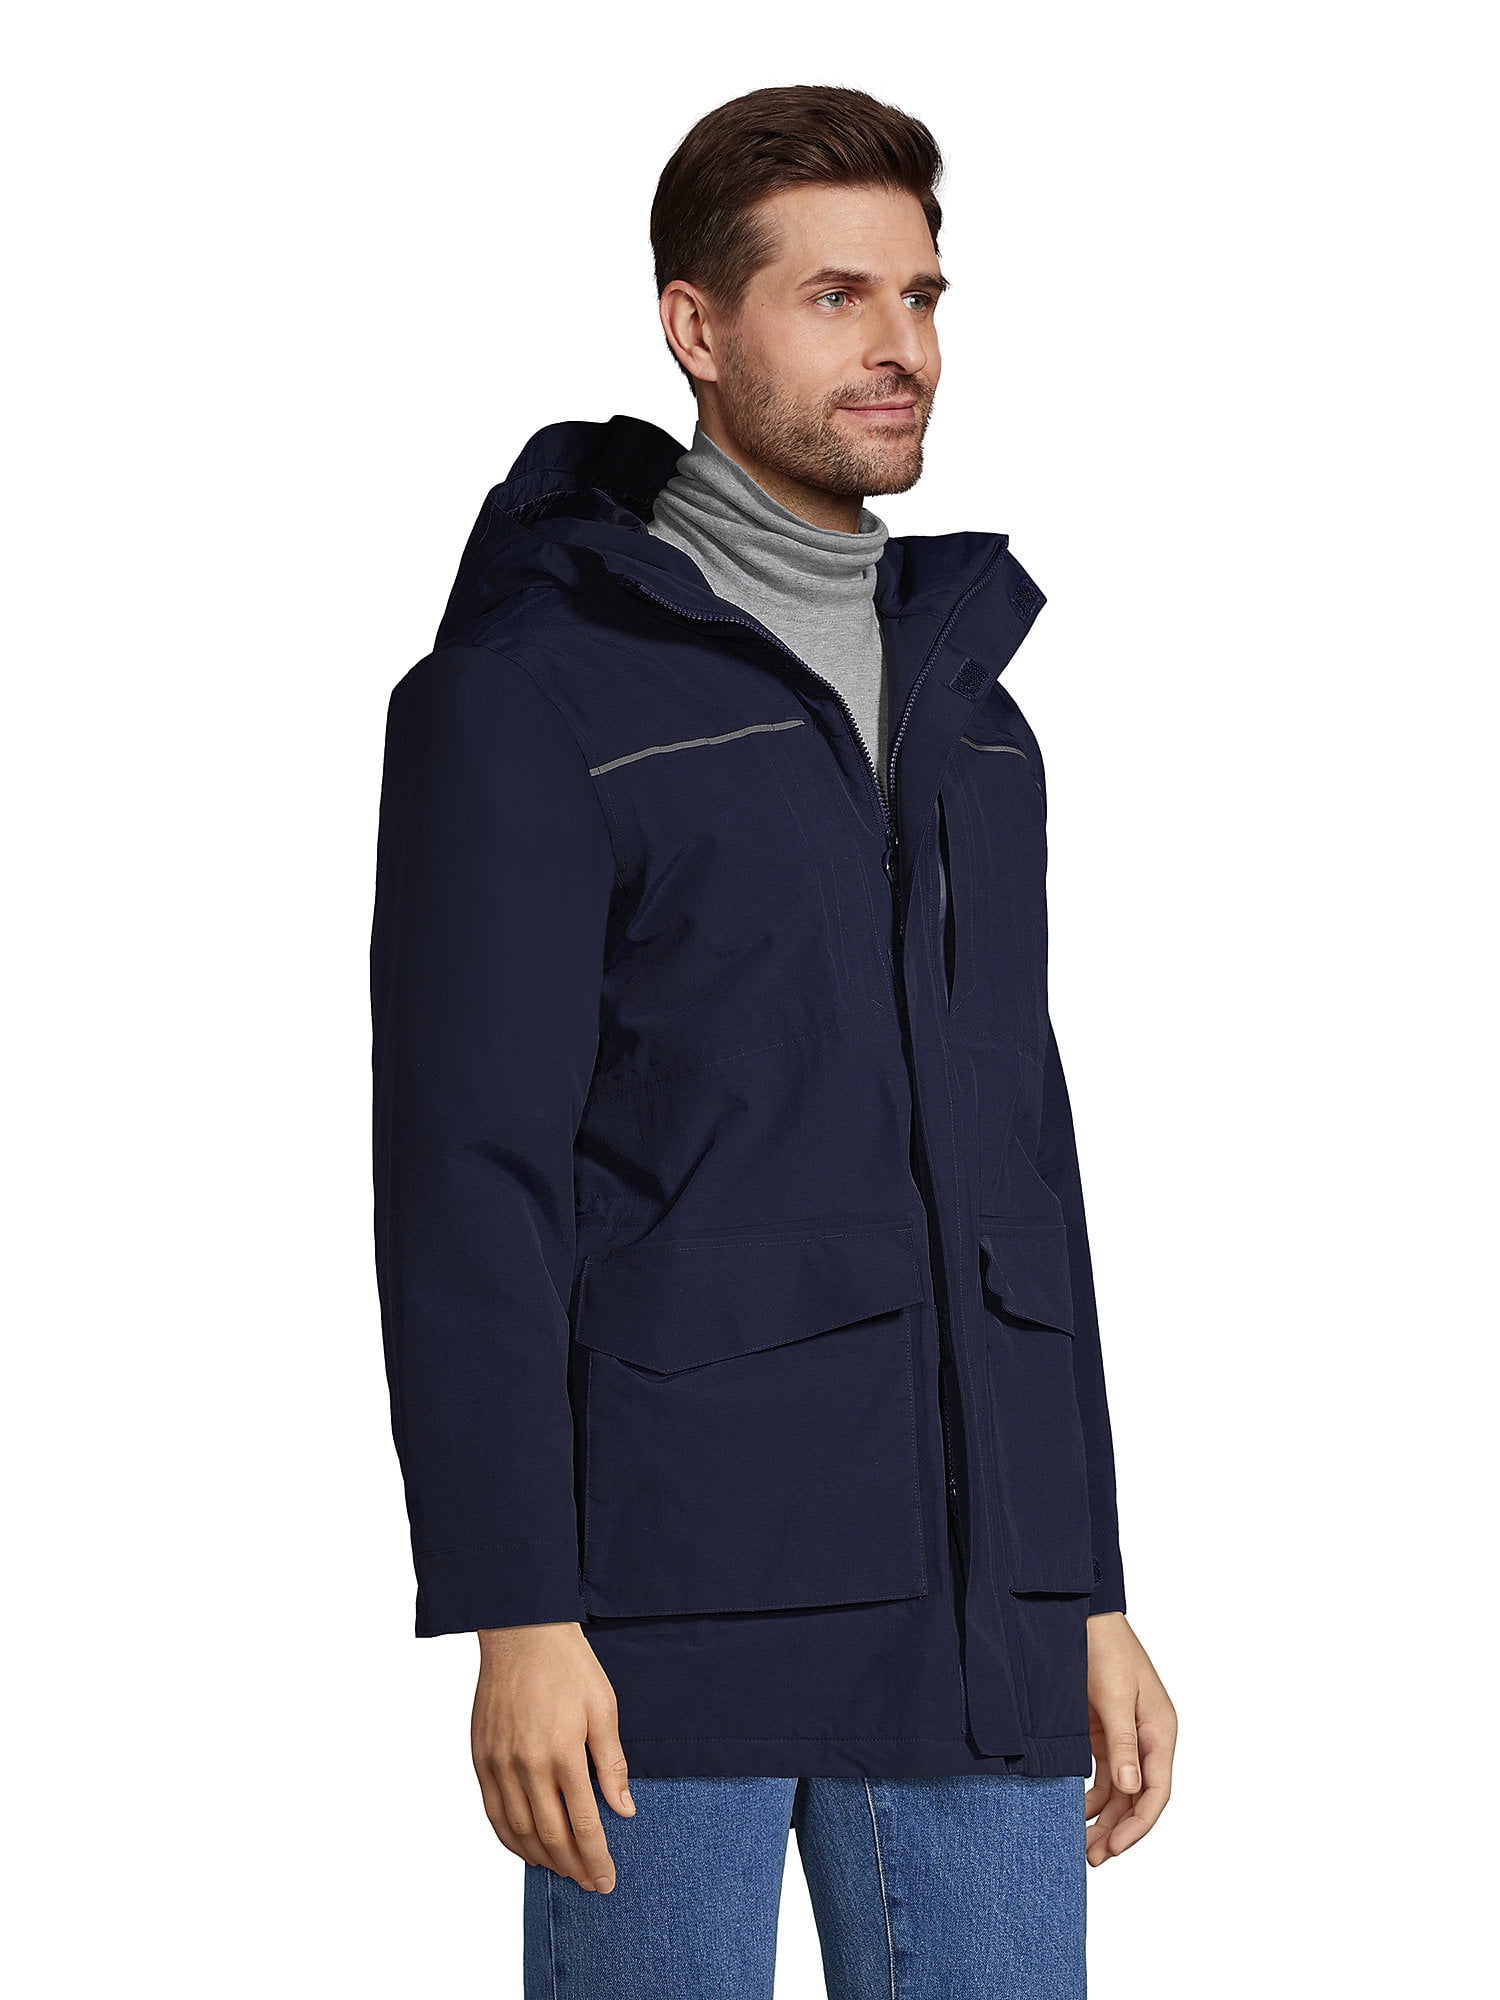 Lands' End Men's Squall Insulated Waterproof Winter Parka